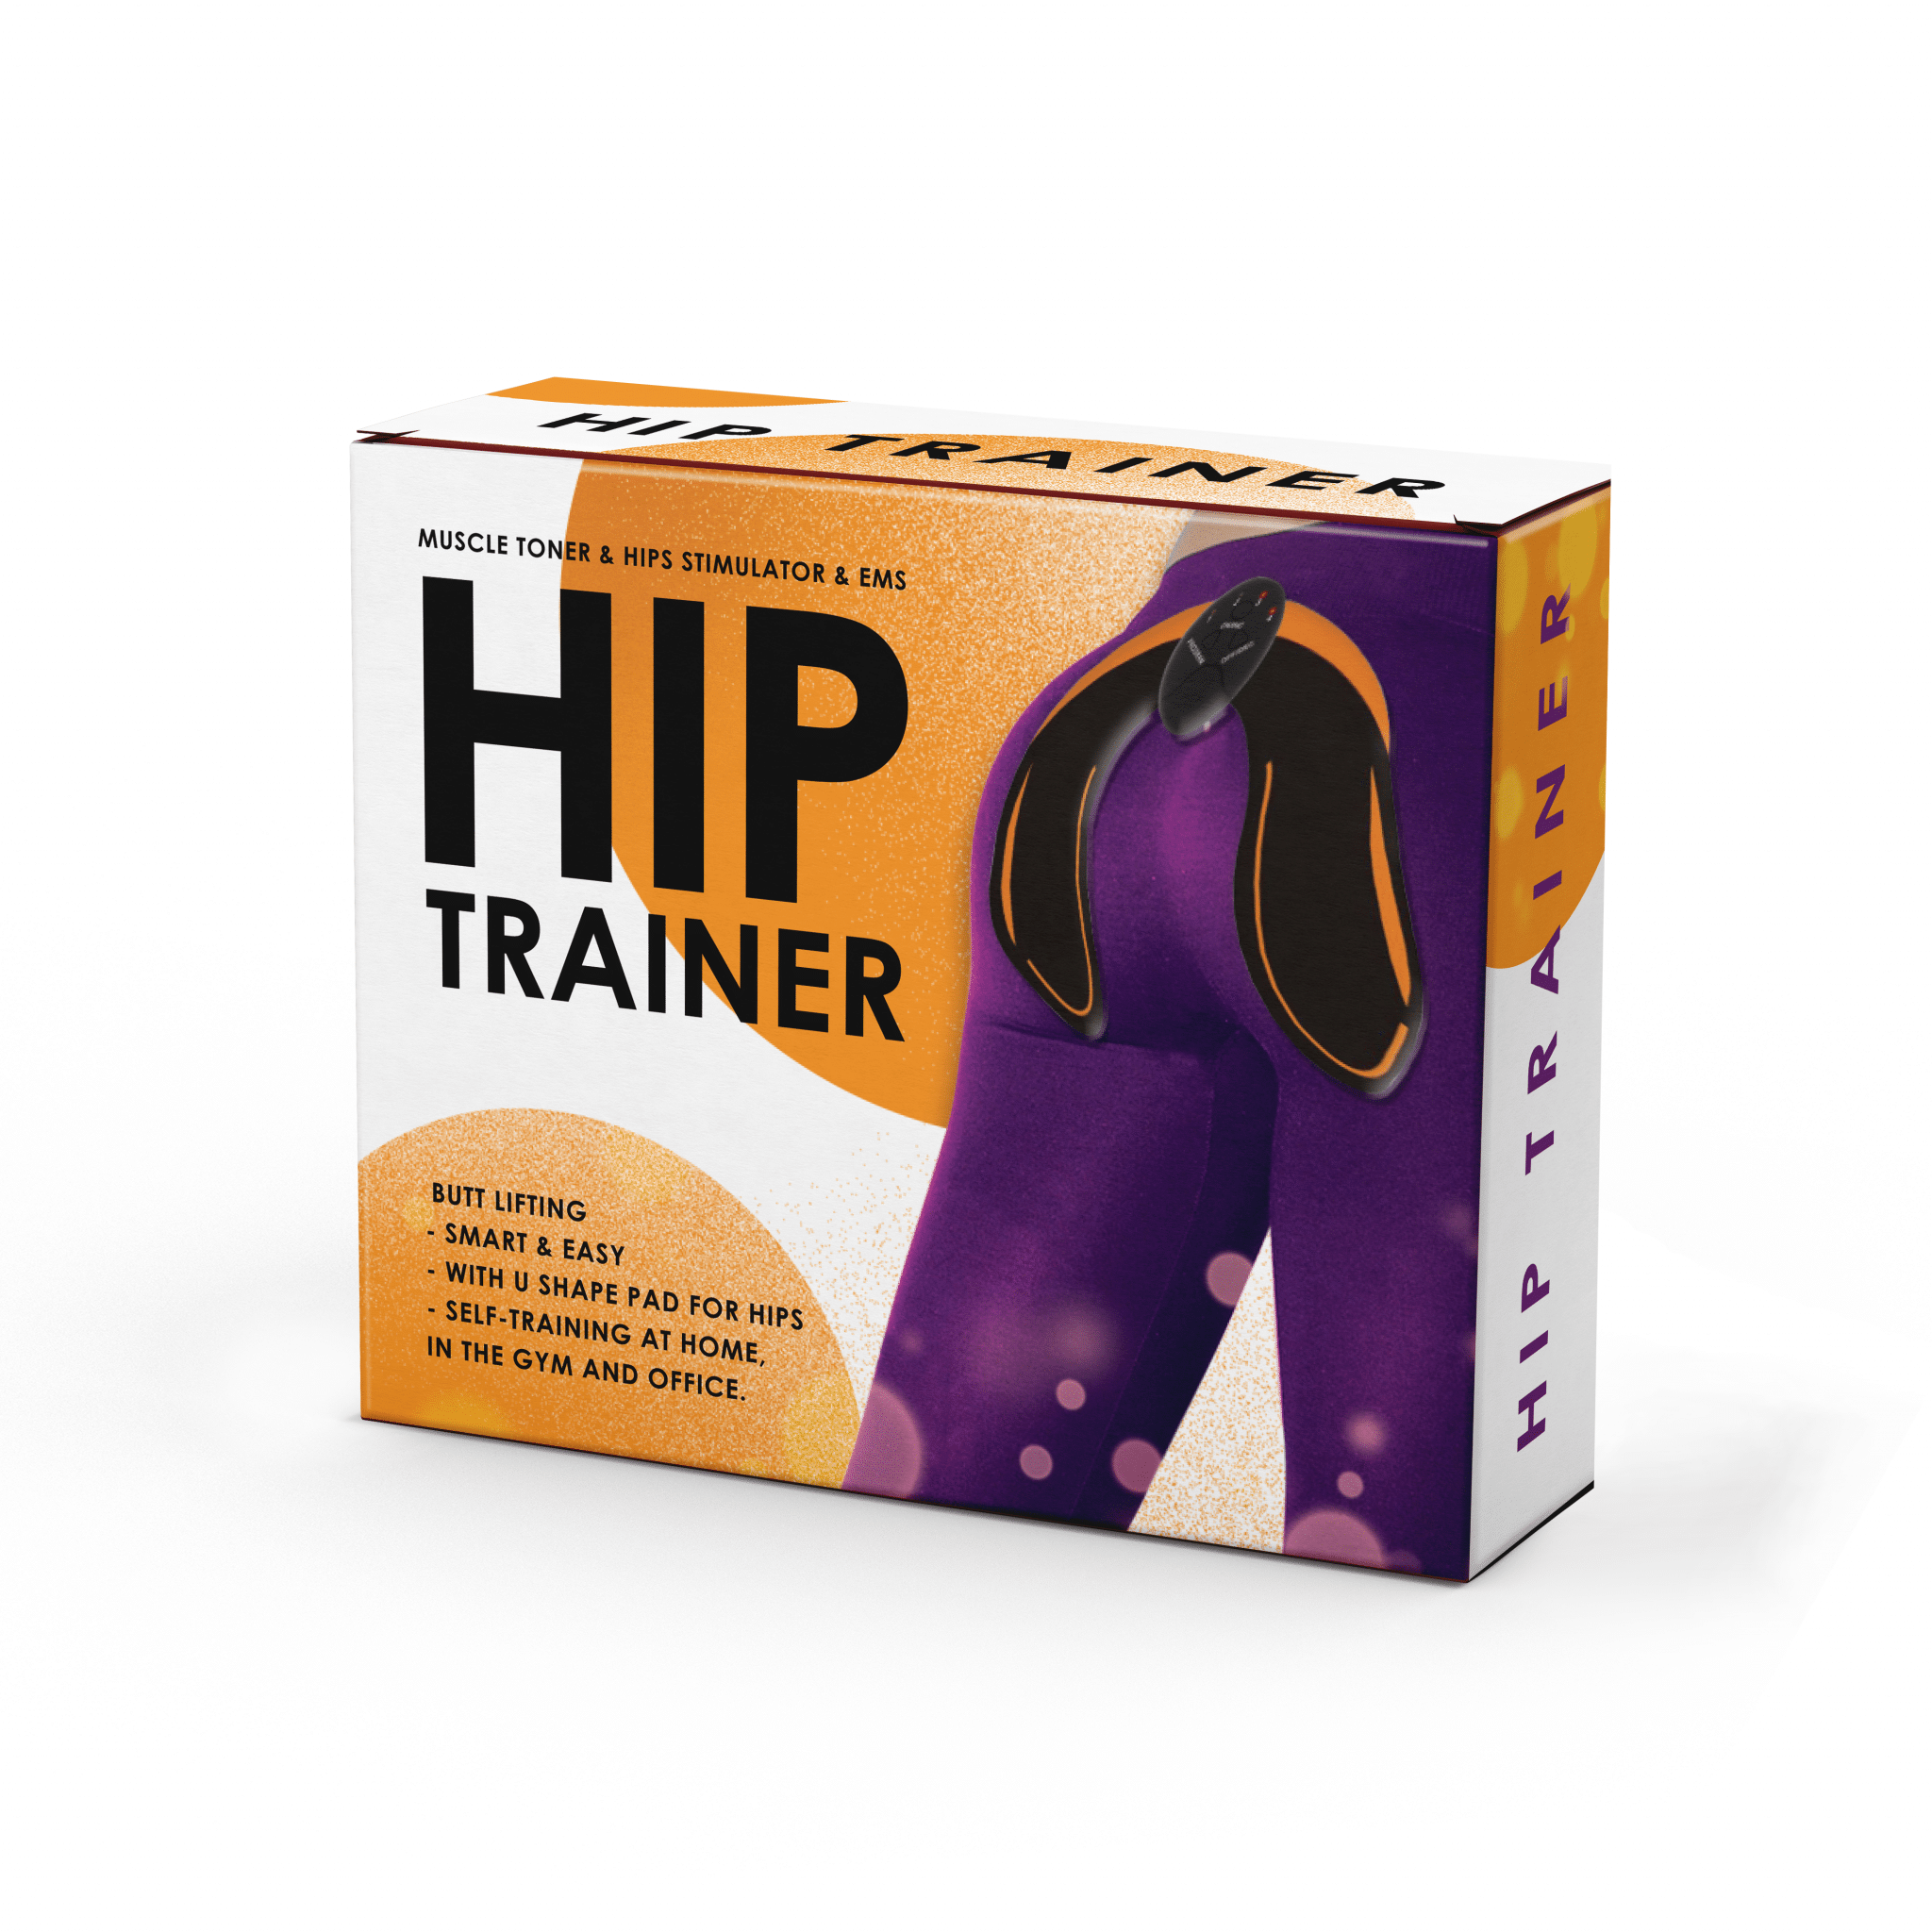 Hip Trainer what is it?